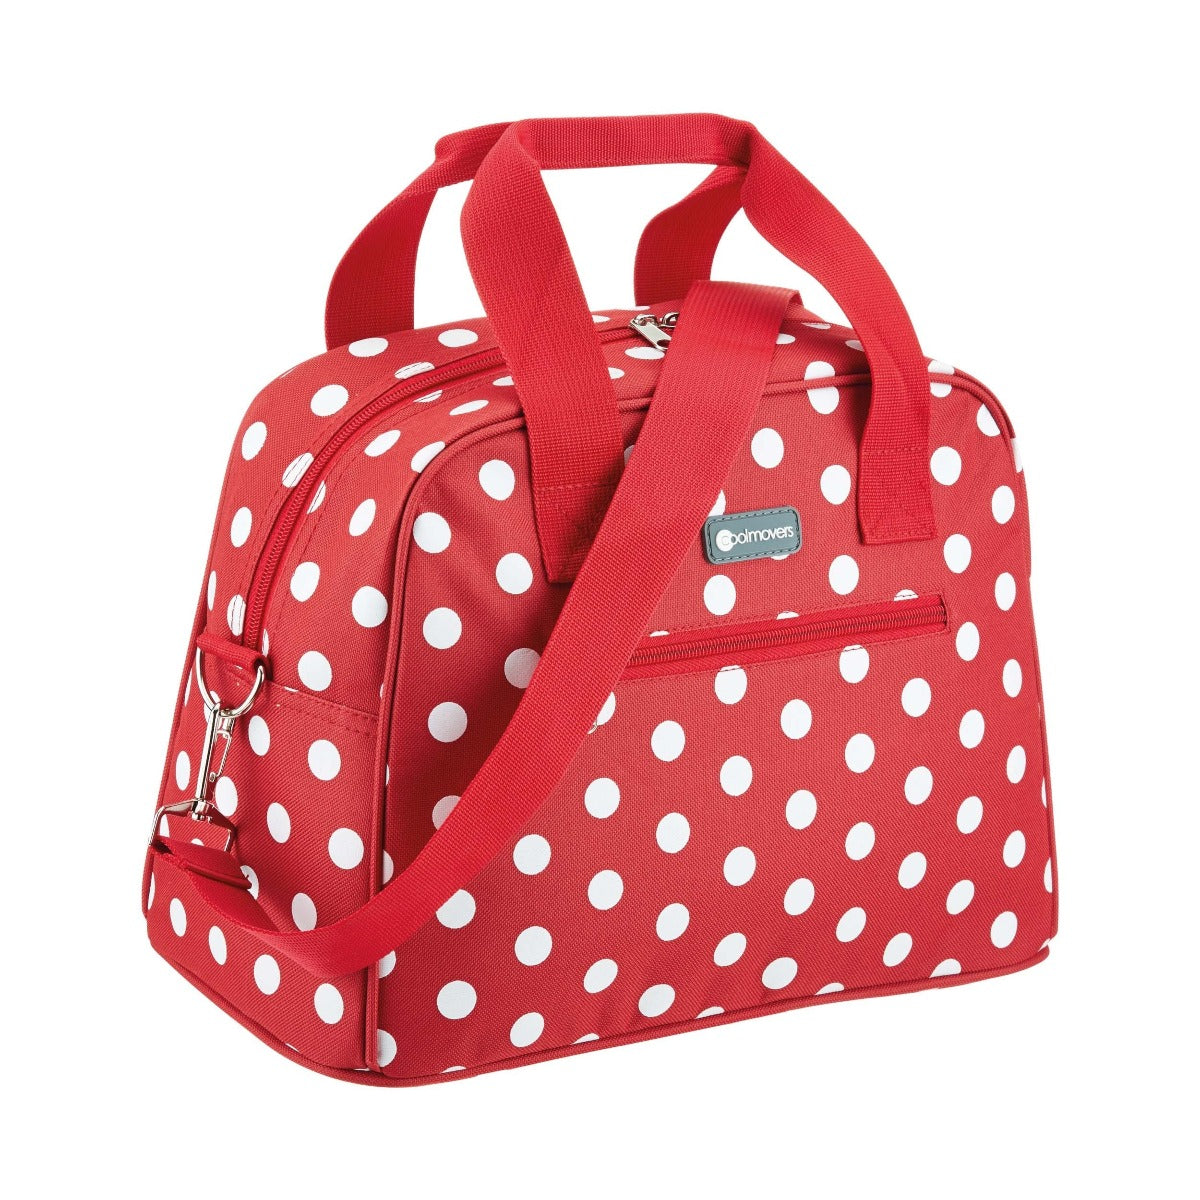 KitchenCraft Holdall Style Cool Bag Red Polka Dot 11.5L